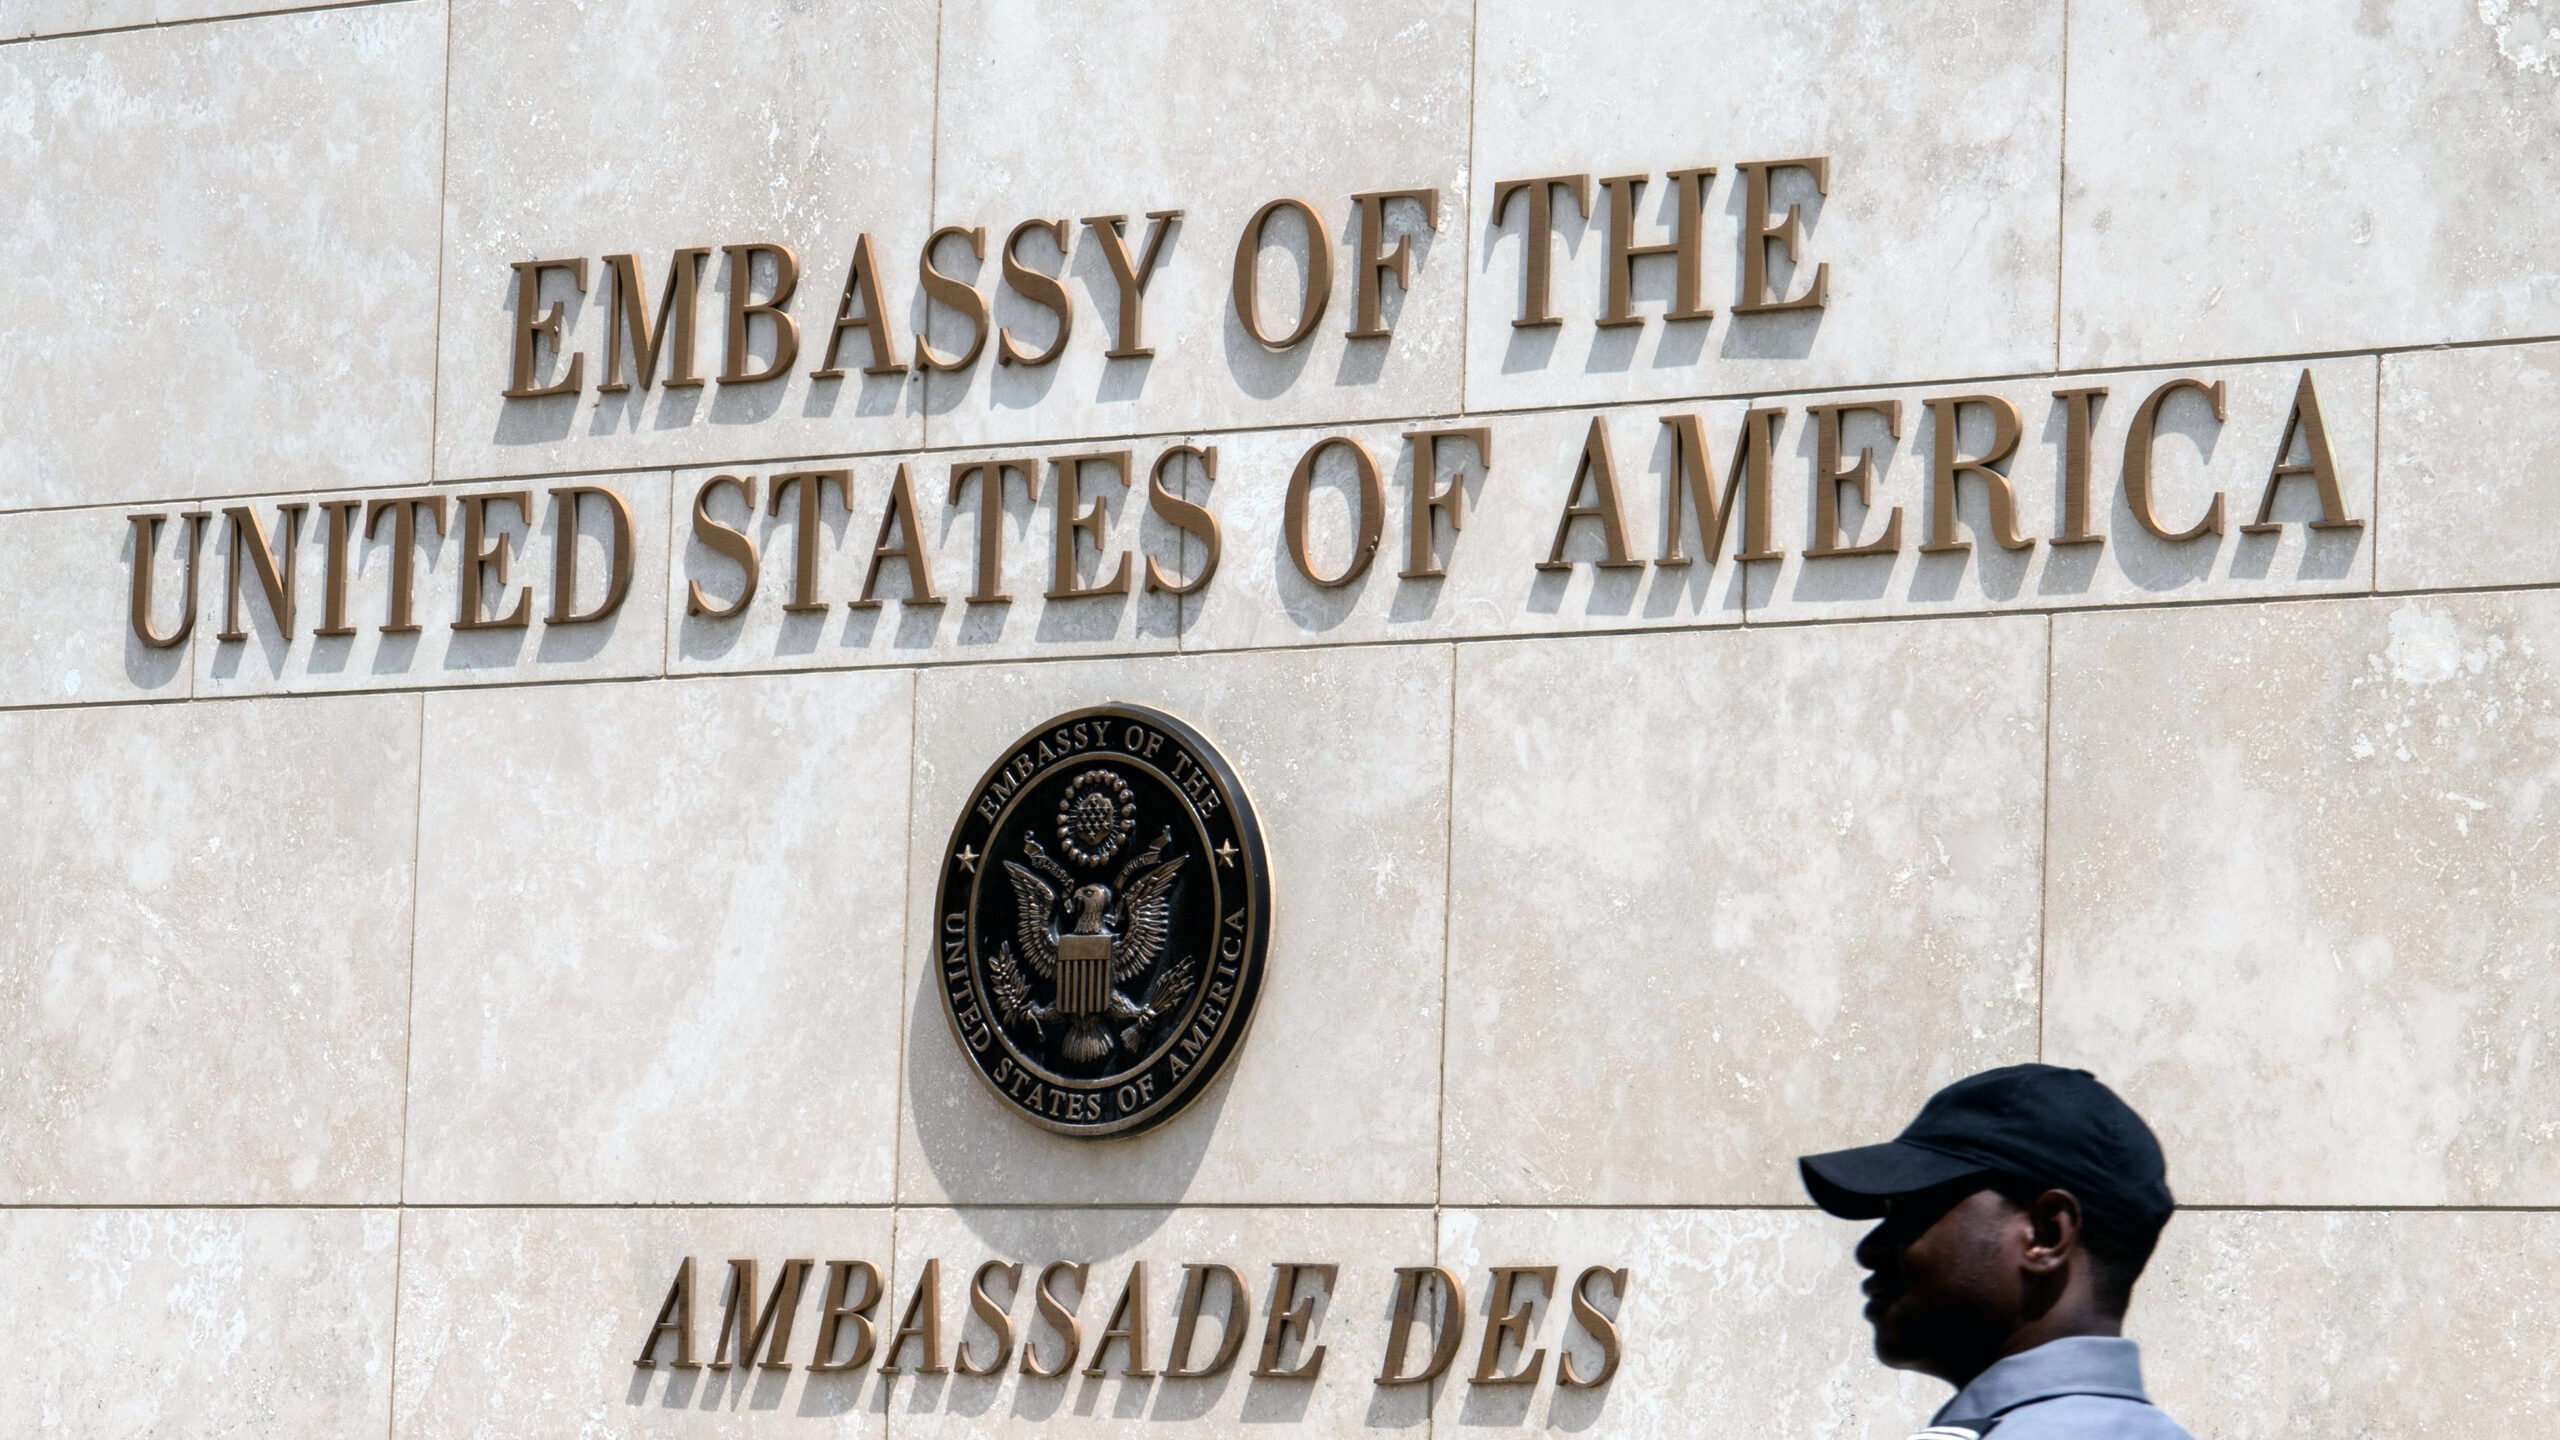 More U.S. Embassies Forced To Evacuate Under Biden Than Any Other U.S. President